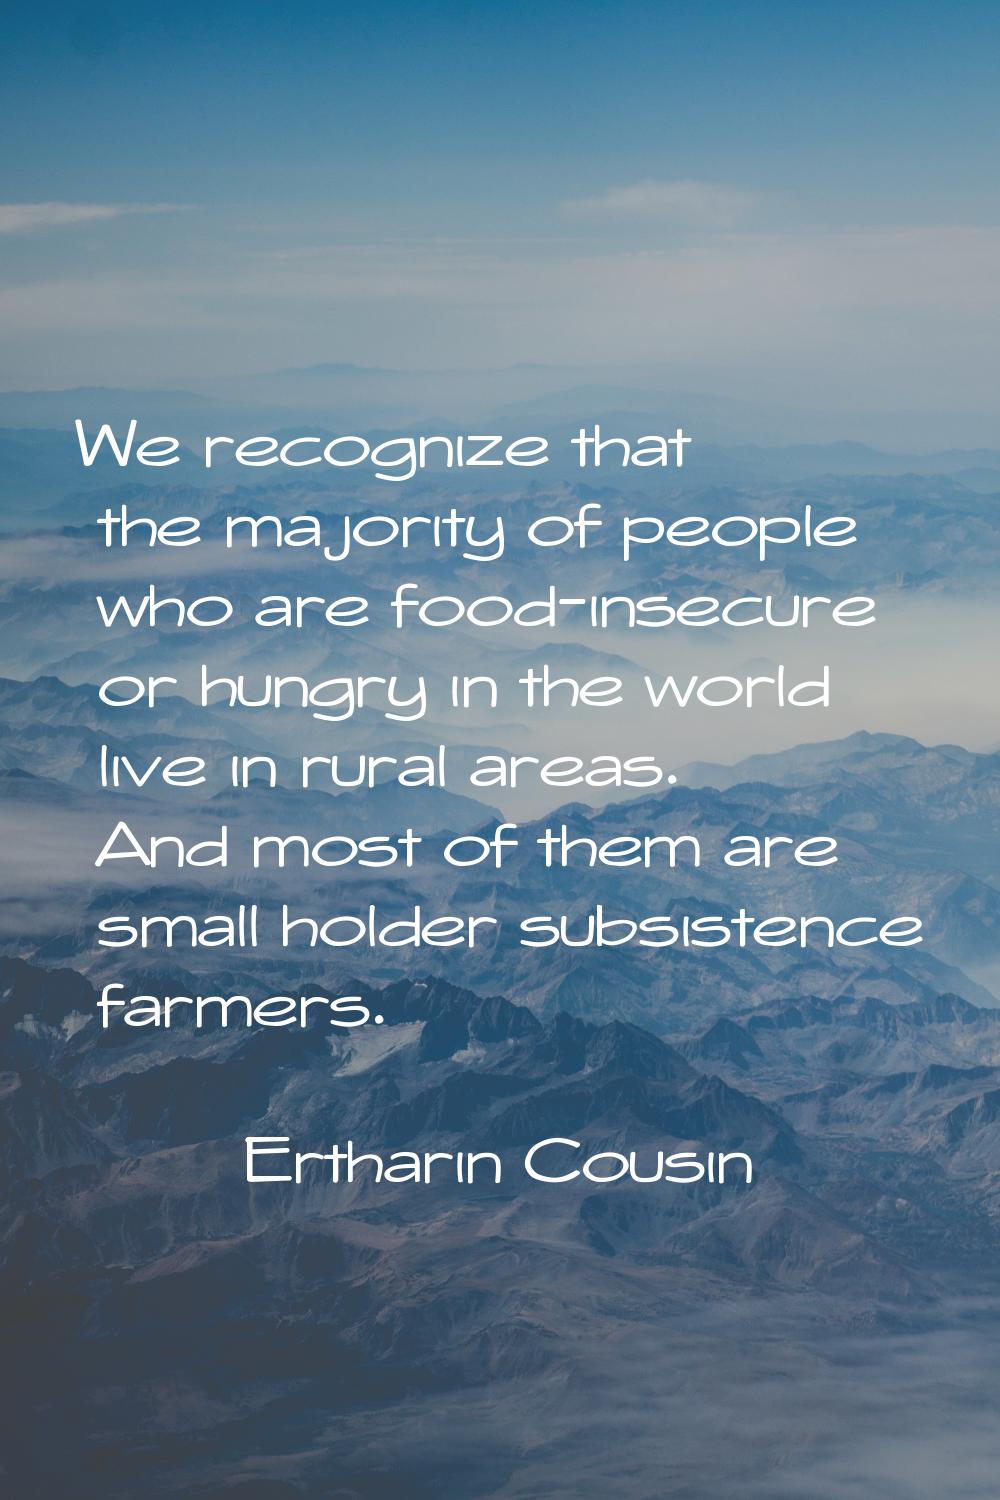 We recognize that the majority of people who are food-insecure or hungry in the world live in rural